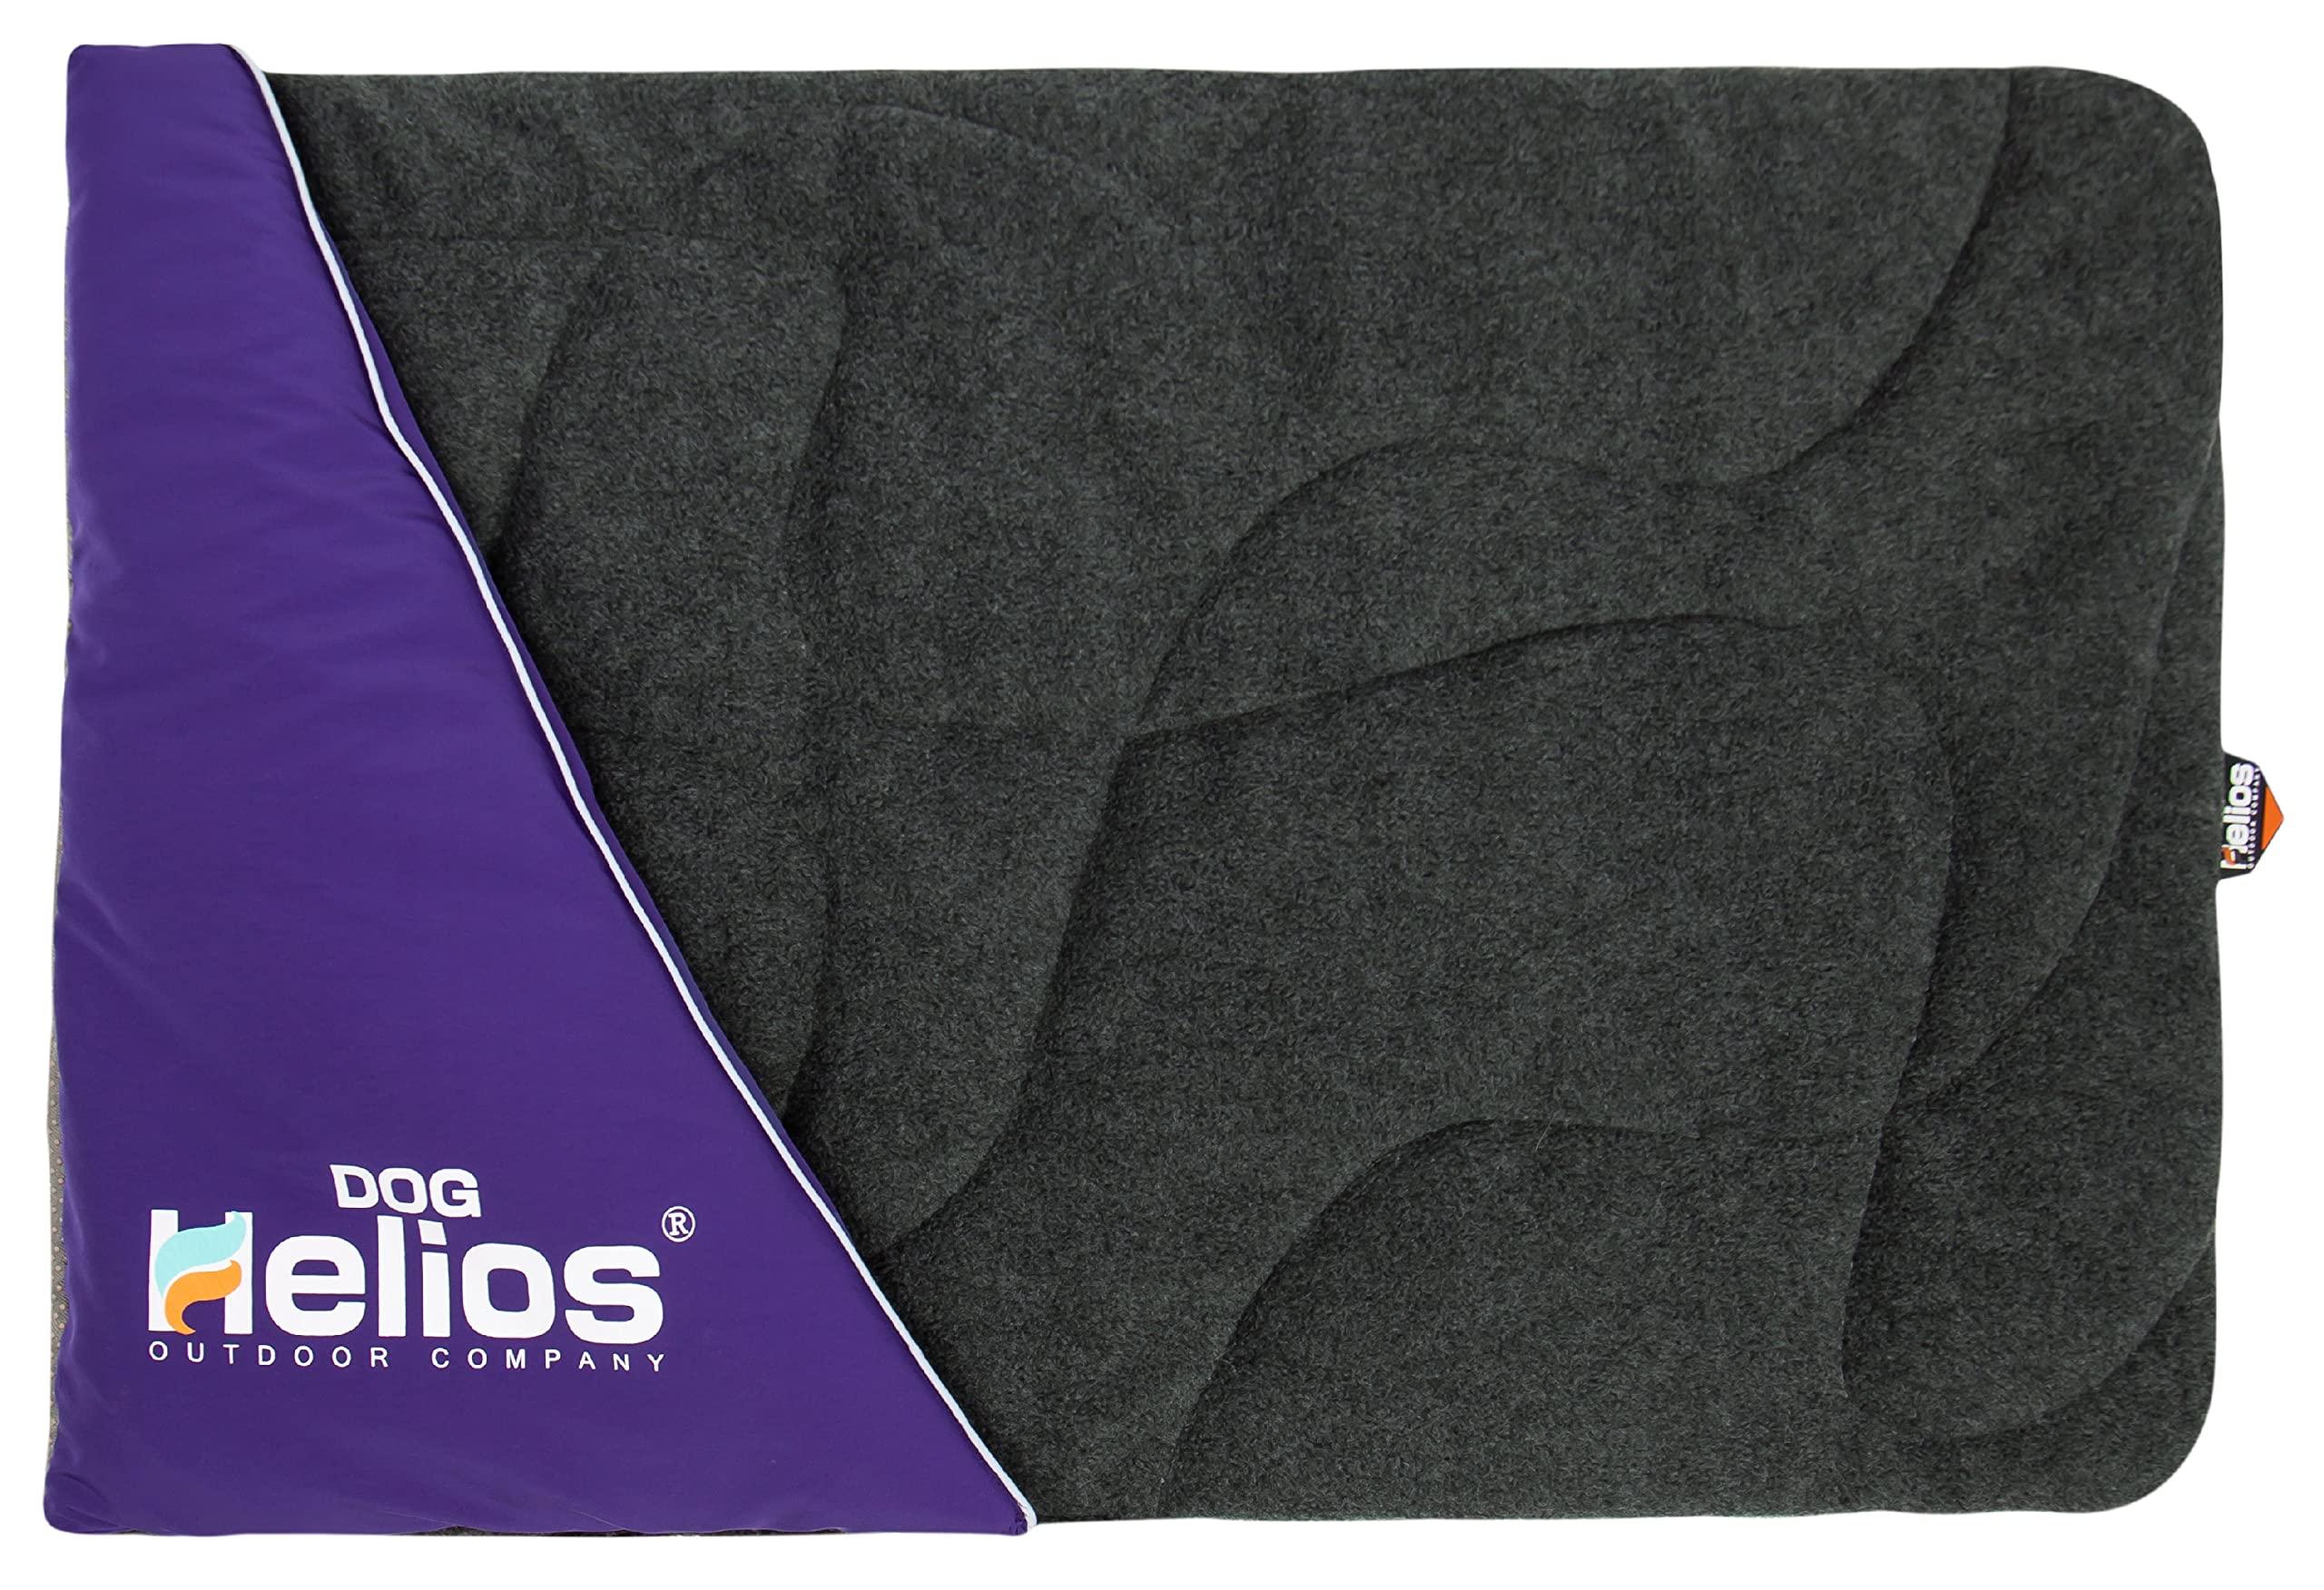 Dog Helios Expedition Sporty Travel Camping Pillow Dog Bed, Purple